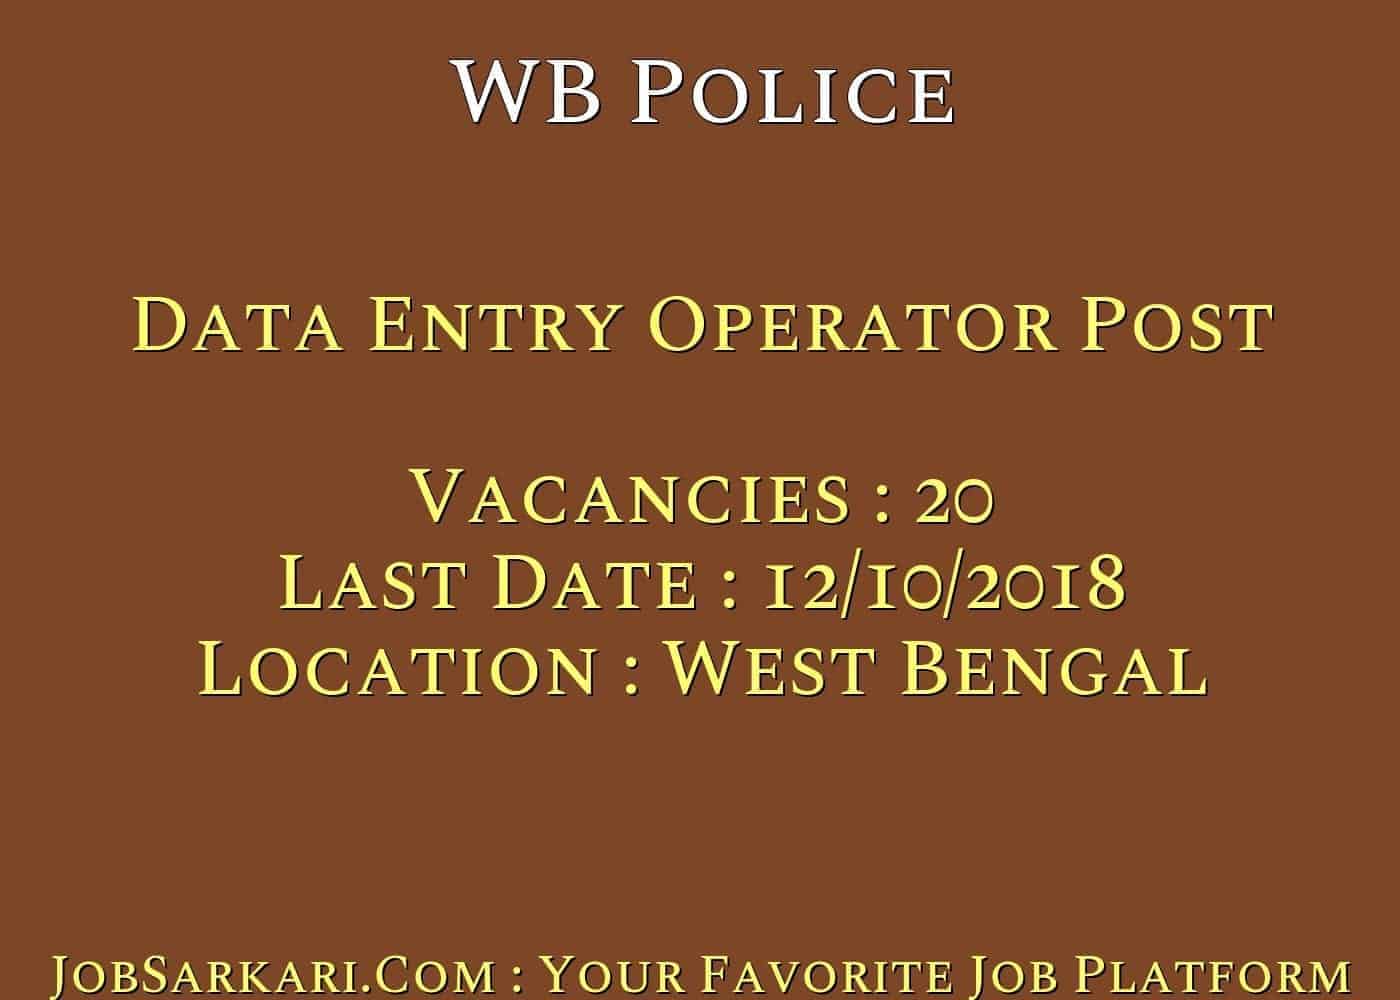 WB Police Recruitment 2018 For Data Entry Operator Post